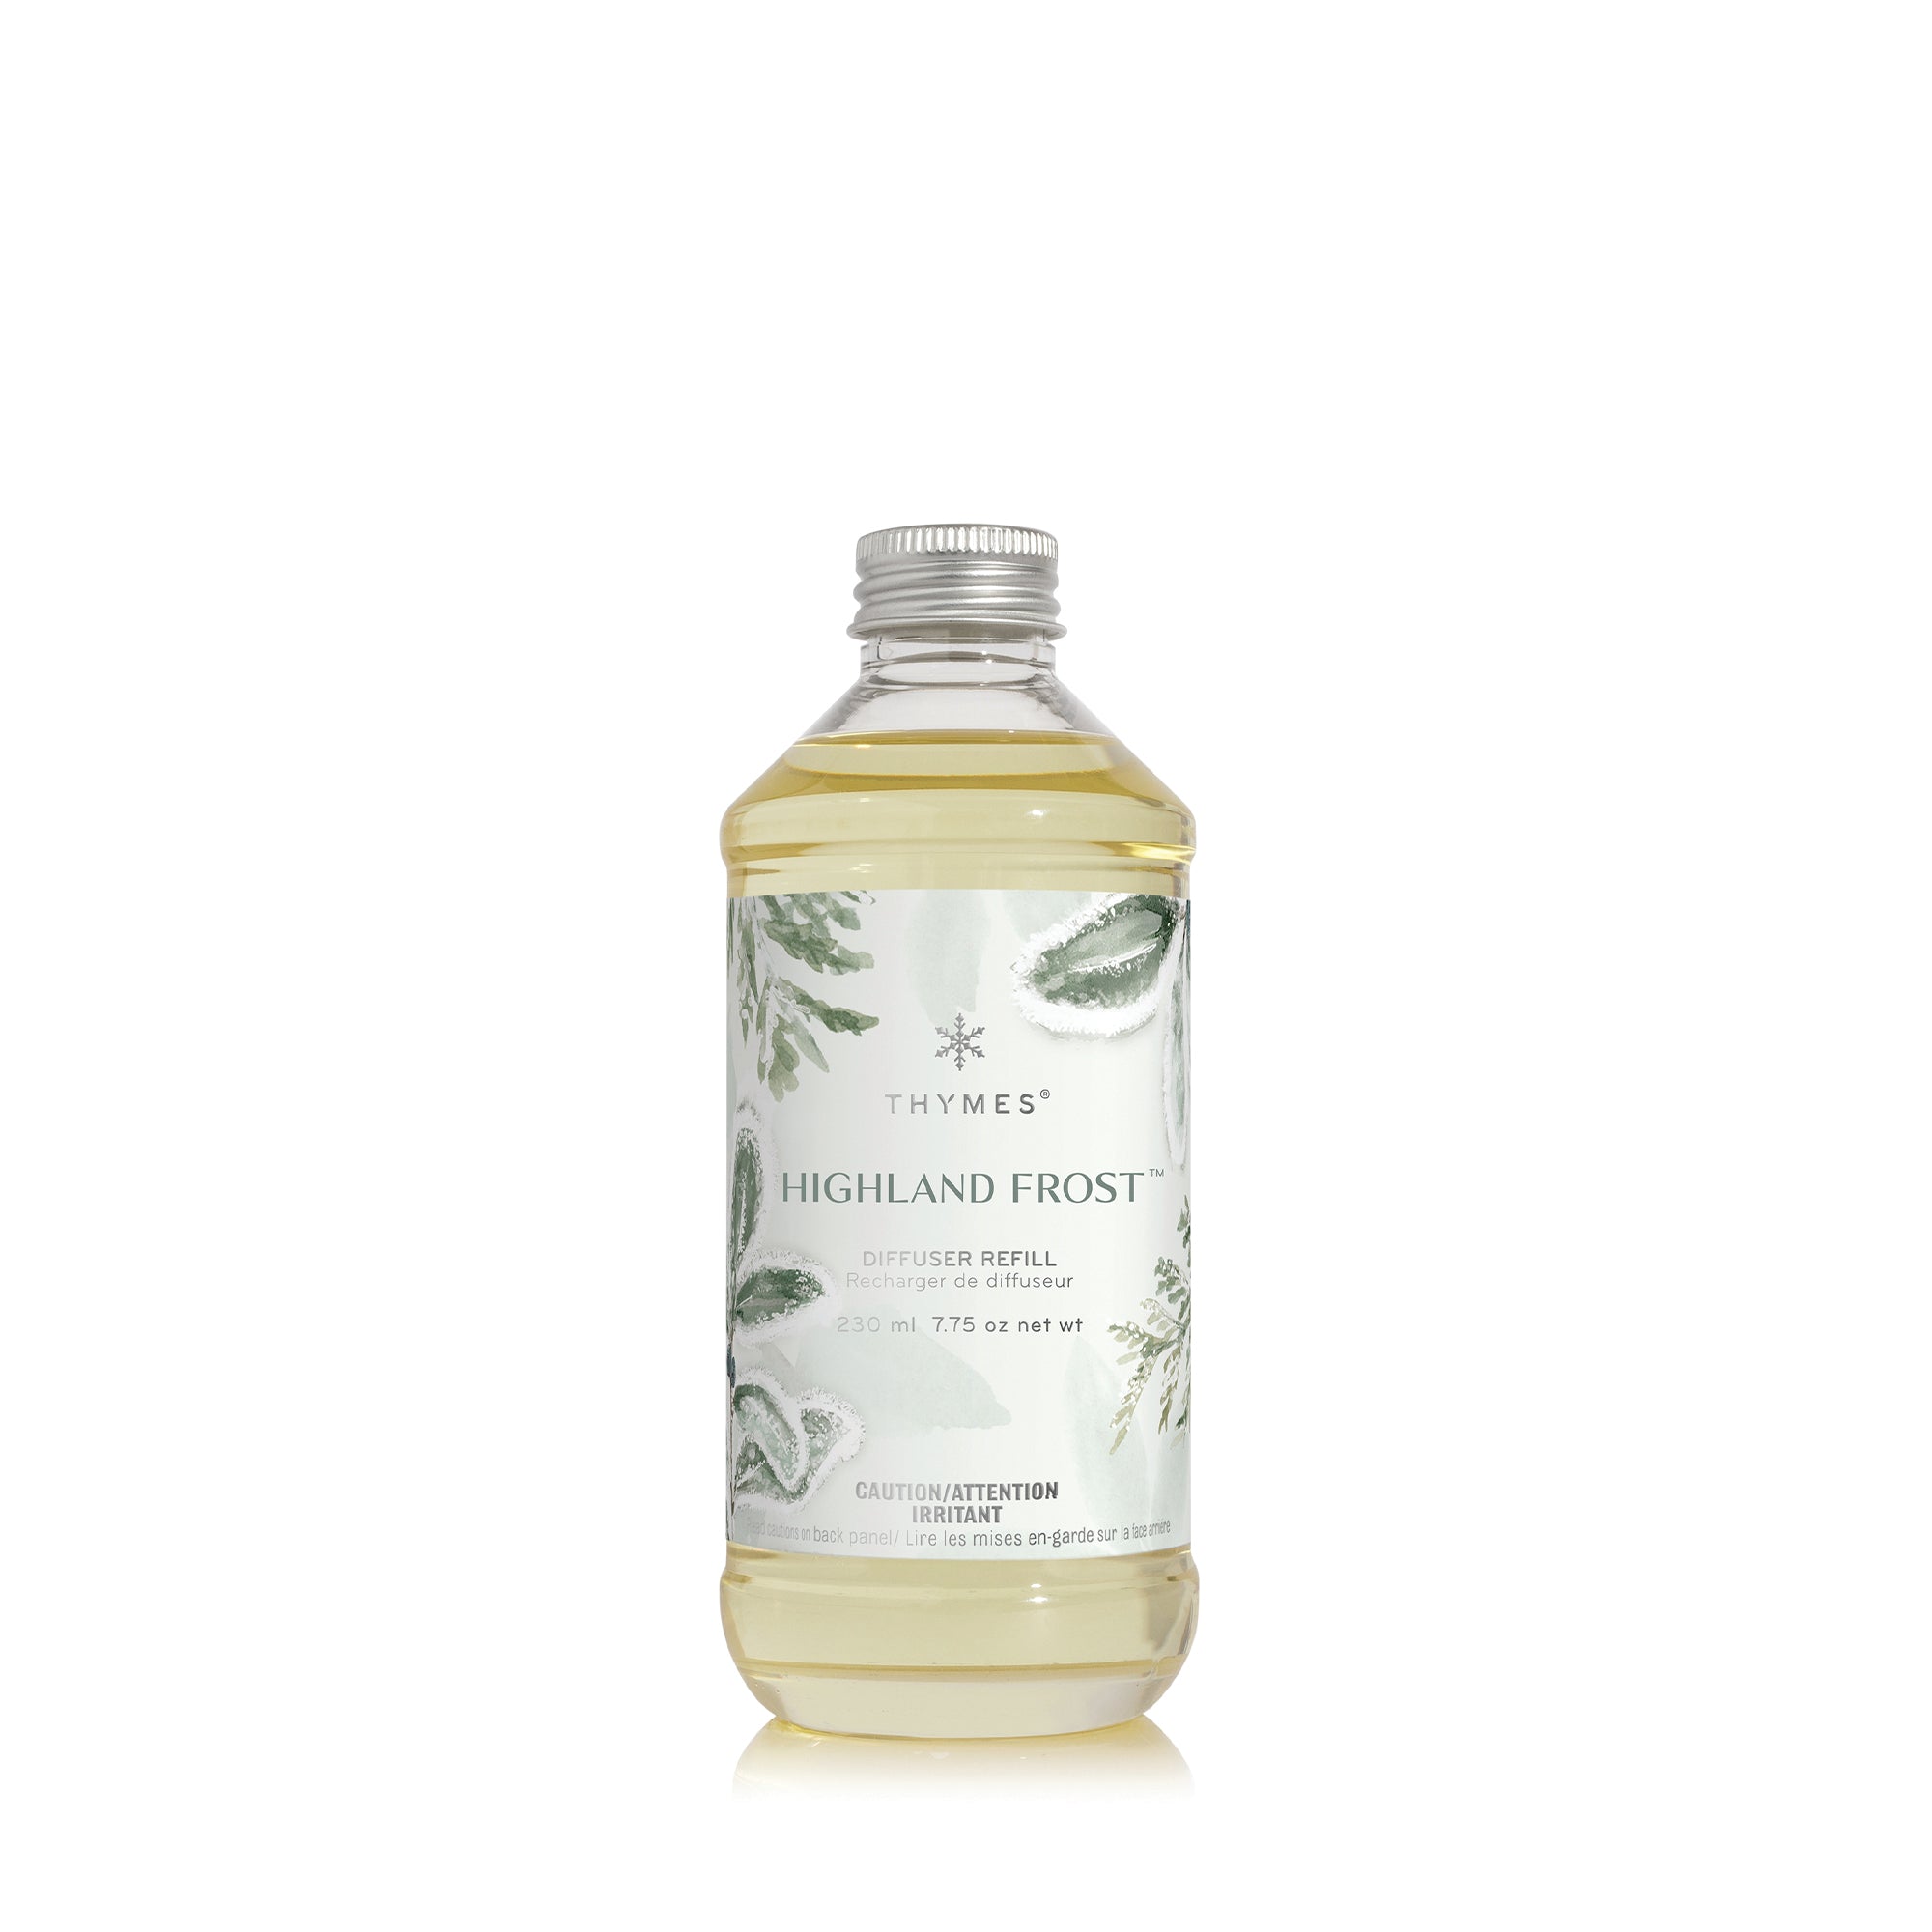 Thymes Highland Frost Reed Diffuser Oil Refill